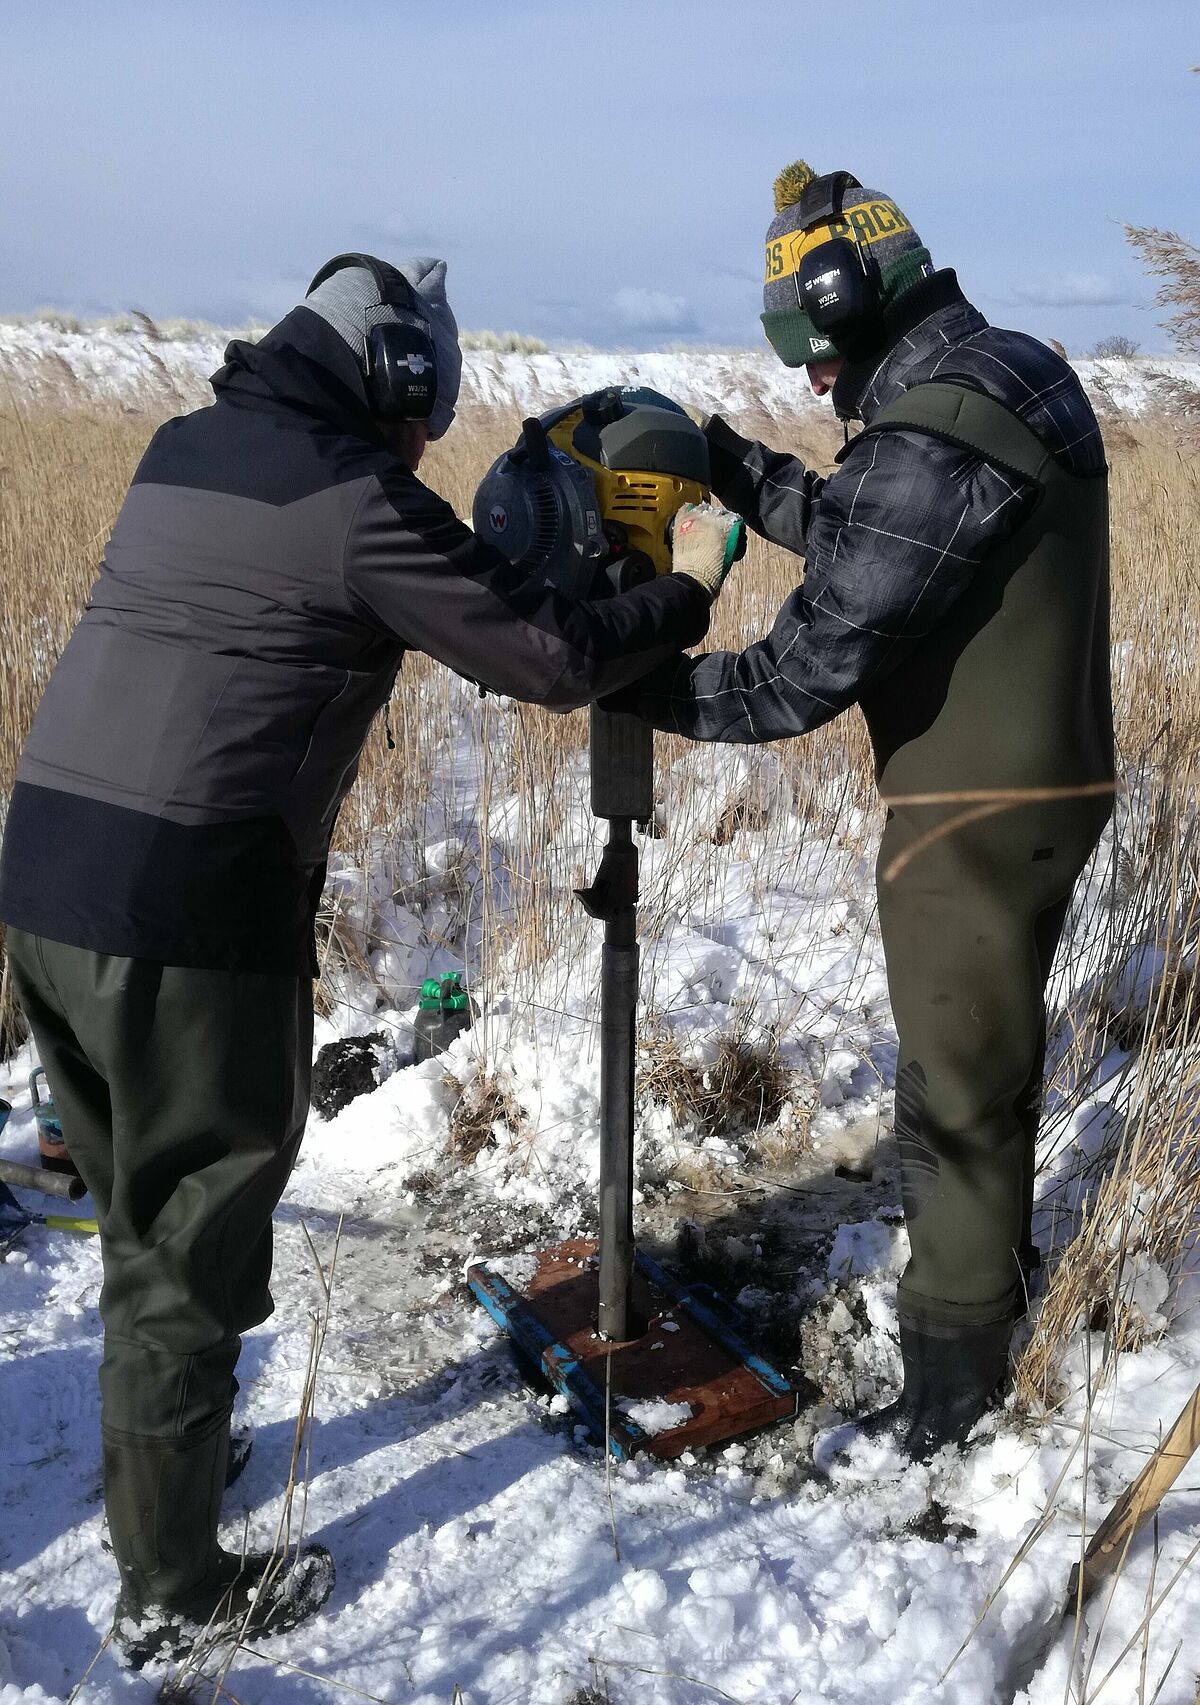 Soil sampling in the study site Hütelmoor with drill hammer in February 2018 (Photo: S. Heller)